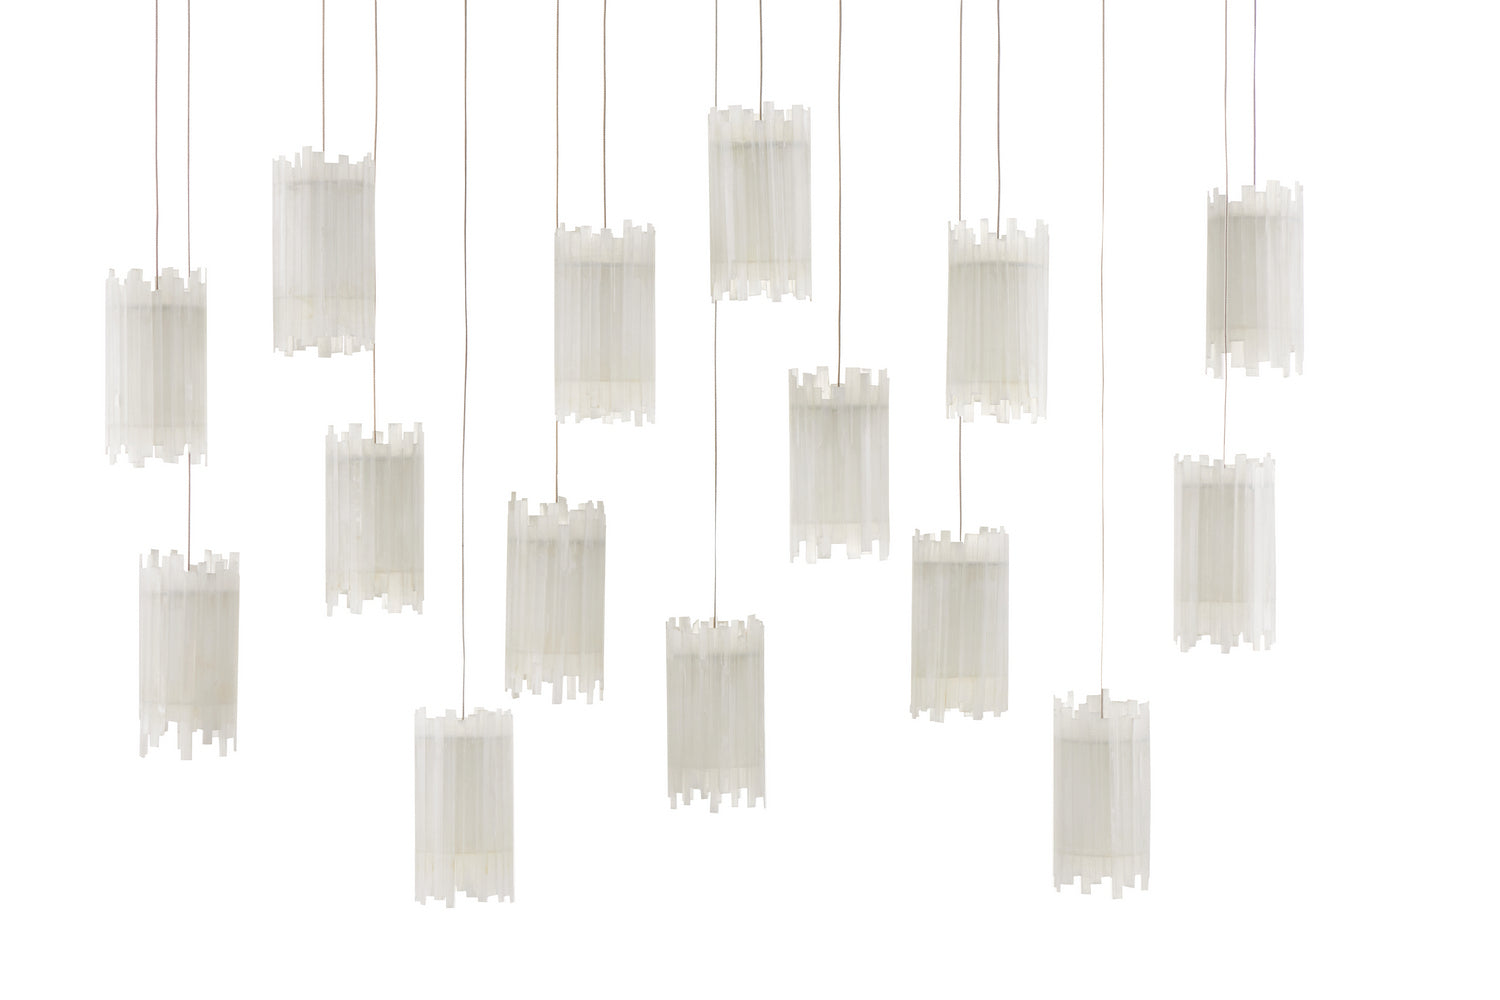 15 Light Pendant from the Escenia collection in Natural/Painted Silver finish